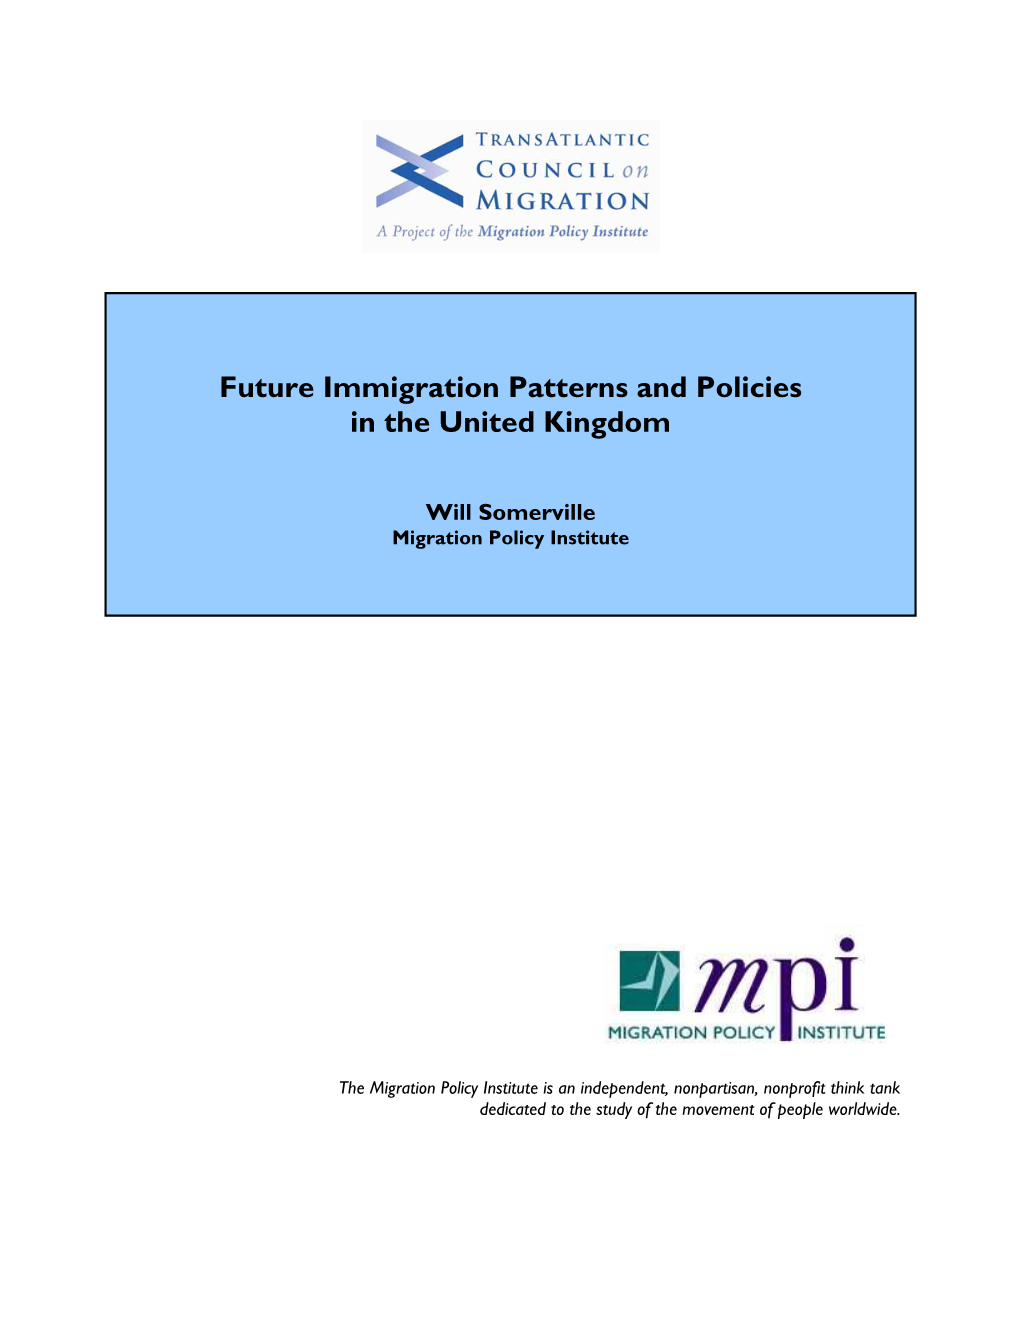 Future Immigration Patterns and Policies in the United Kingdom